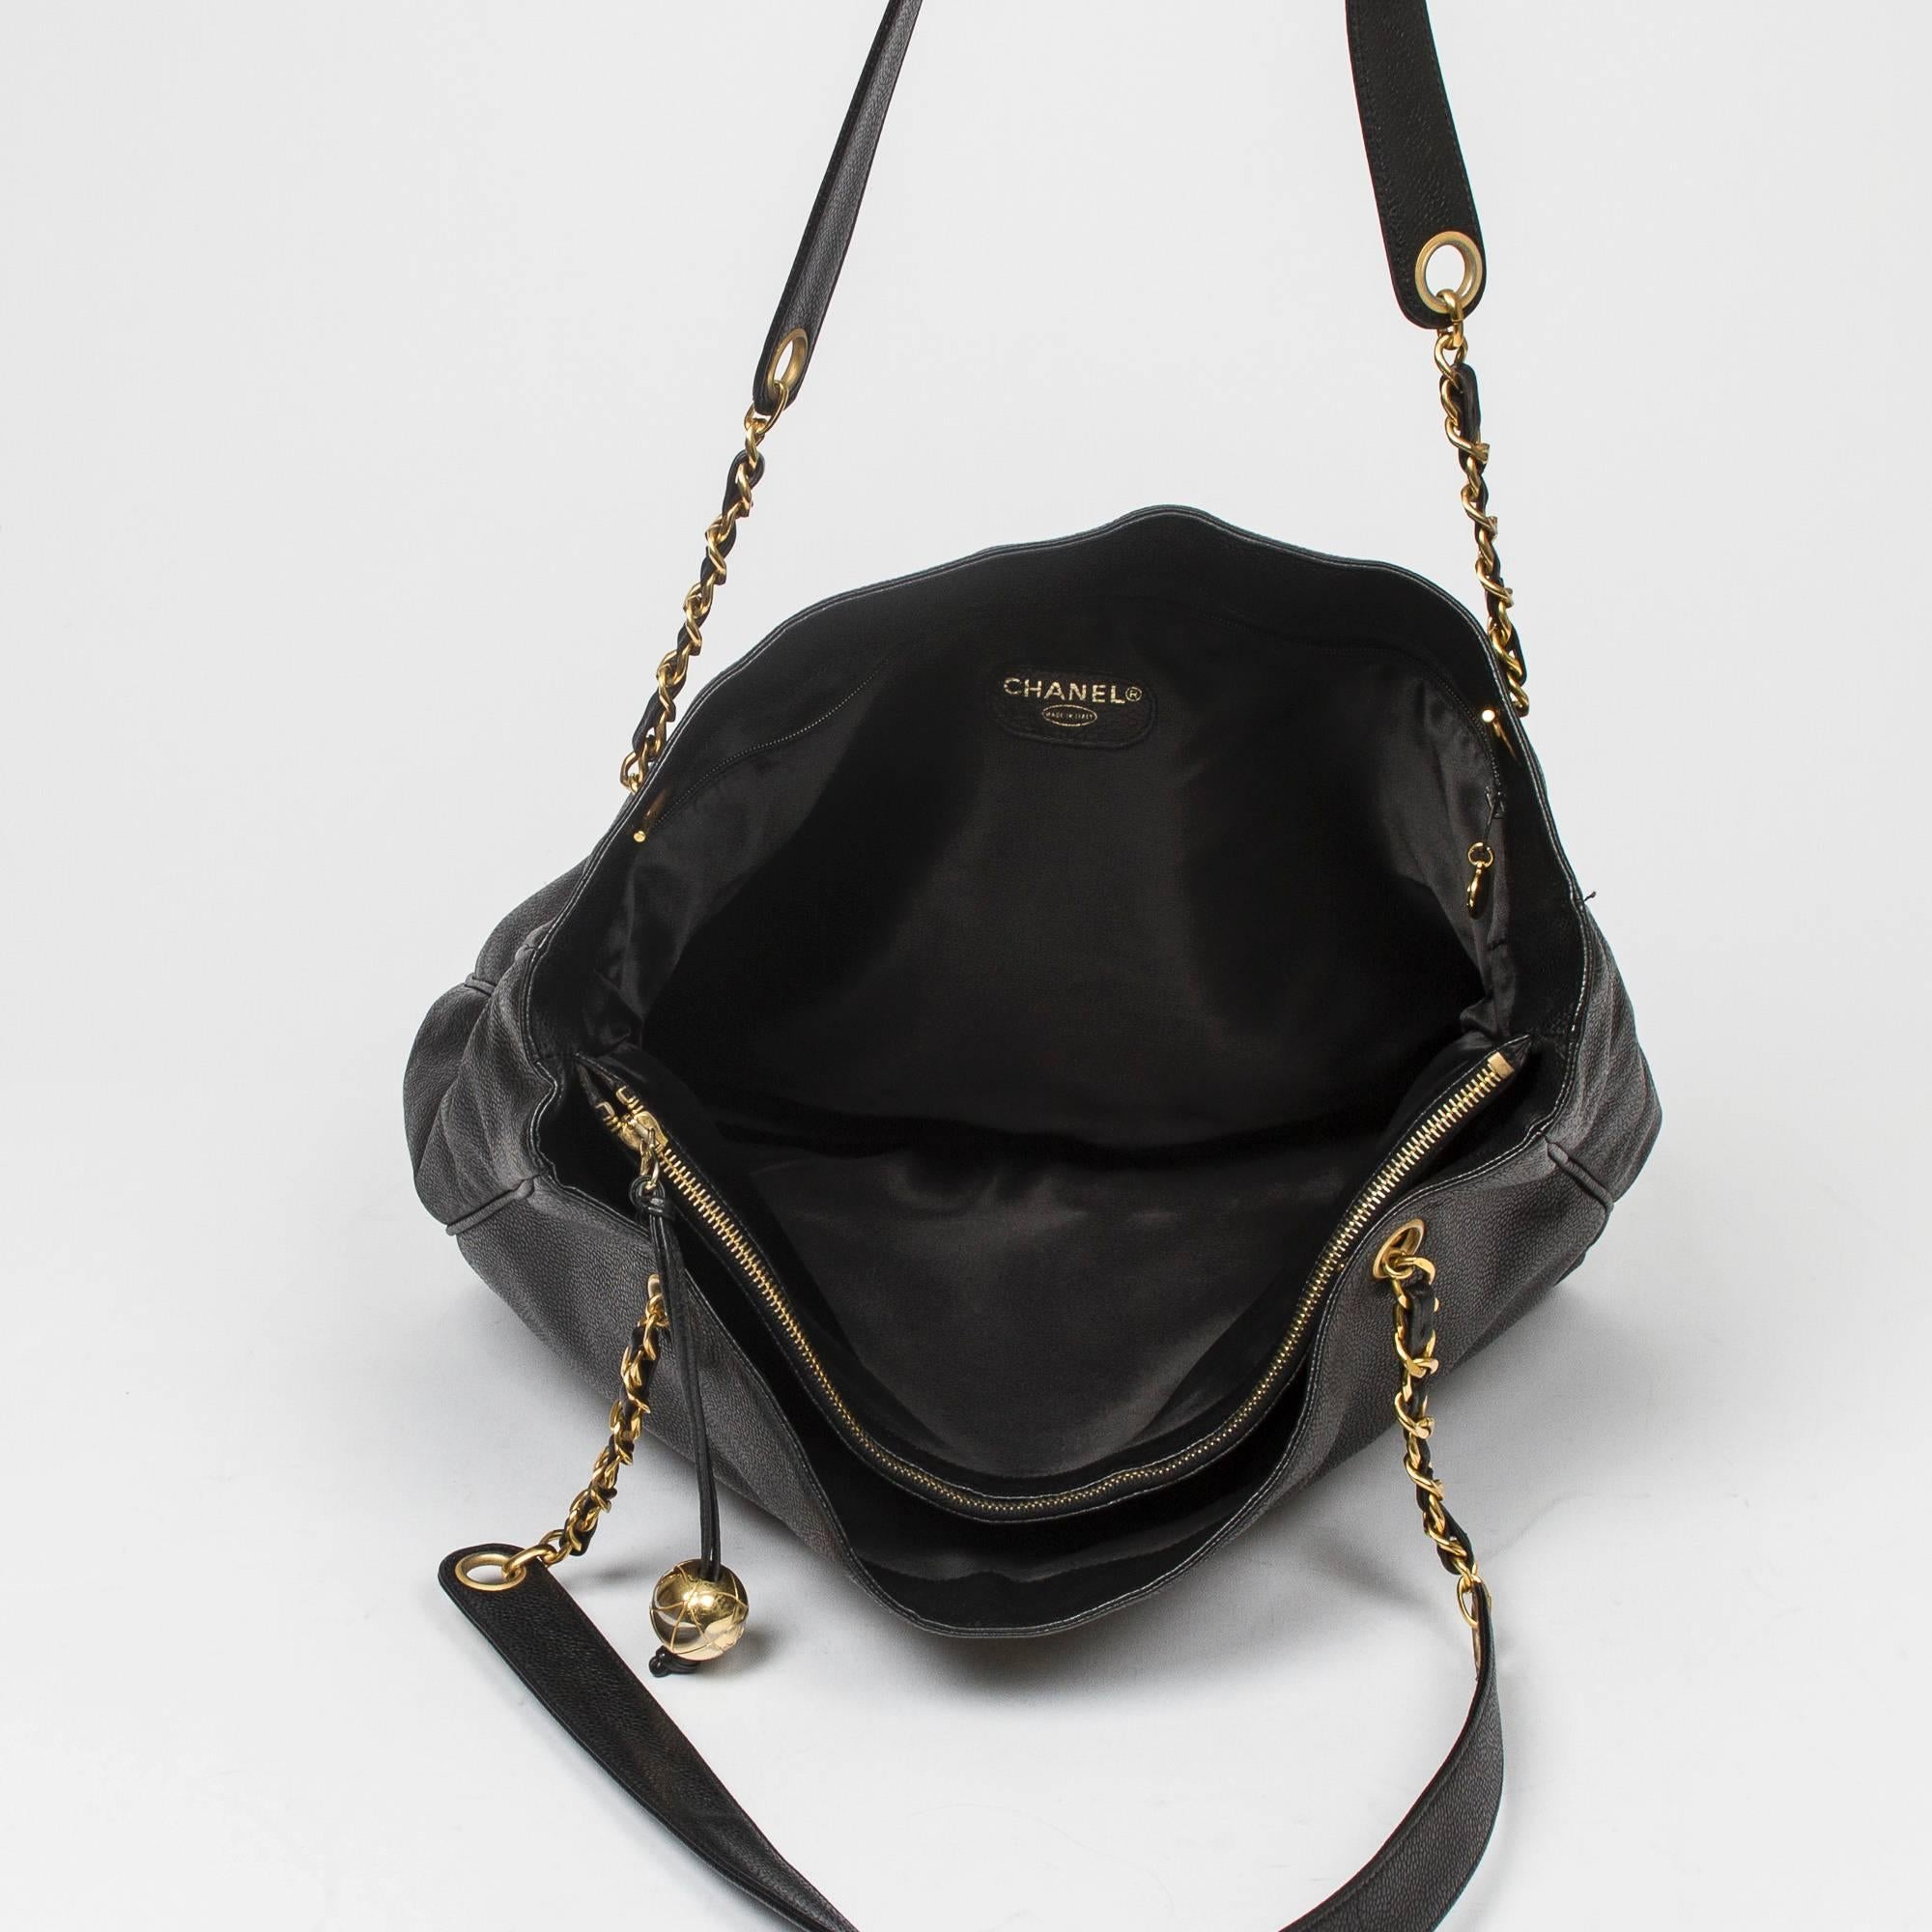 Chanel - Vintage Large Tote Black Caviar Leather 2